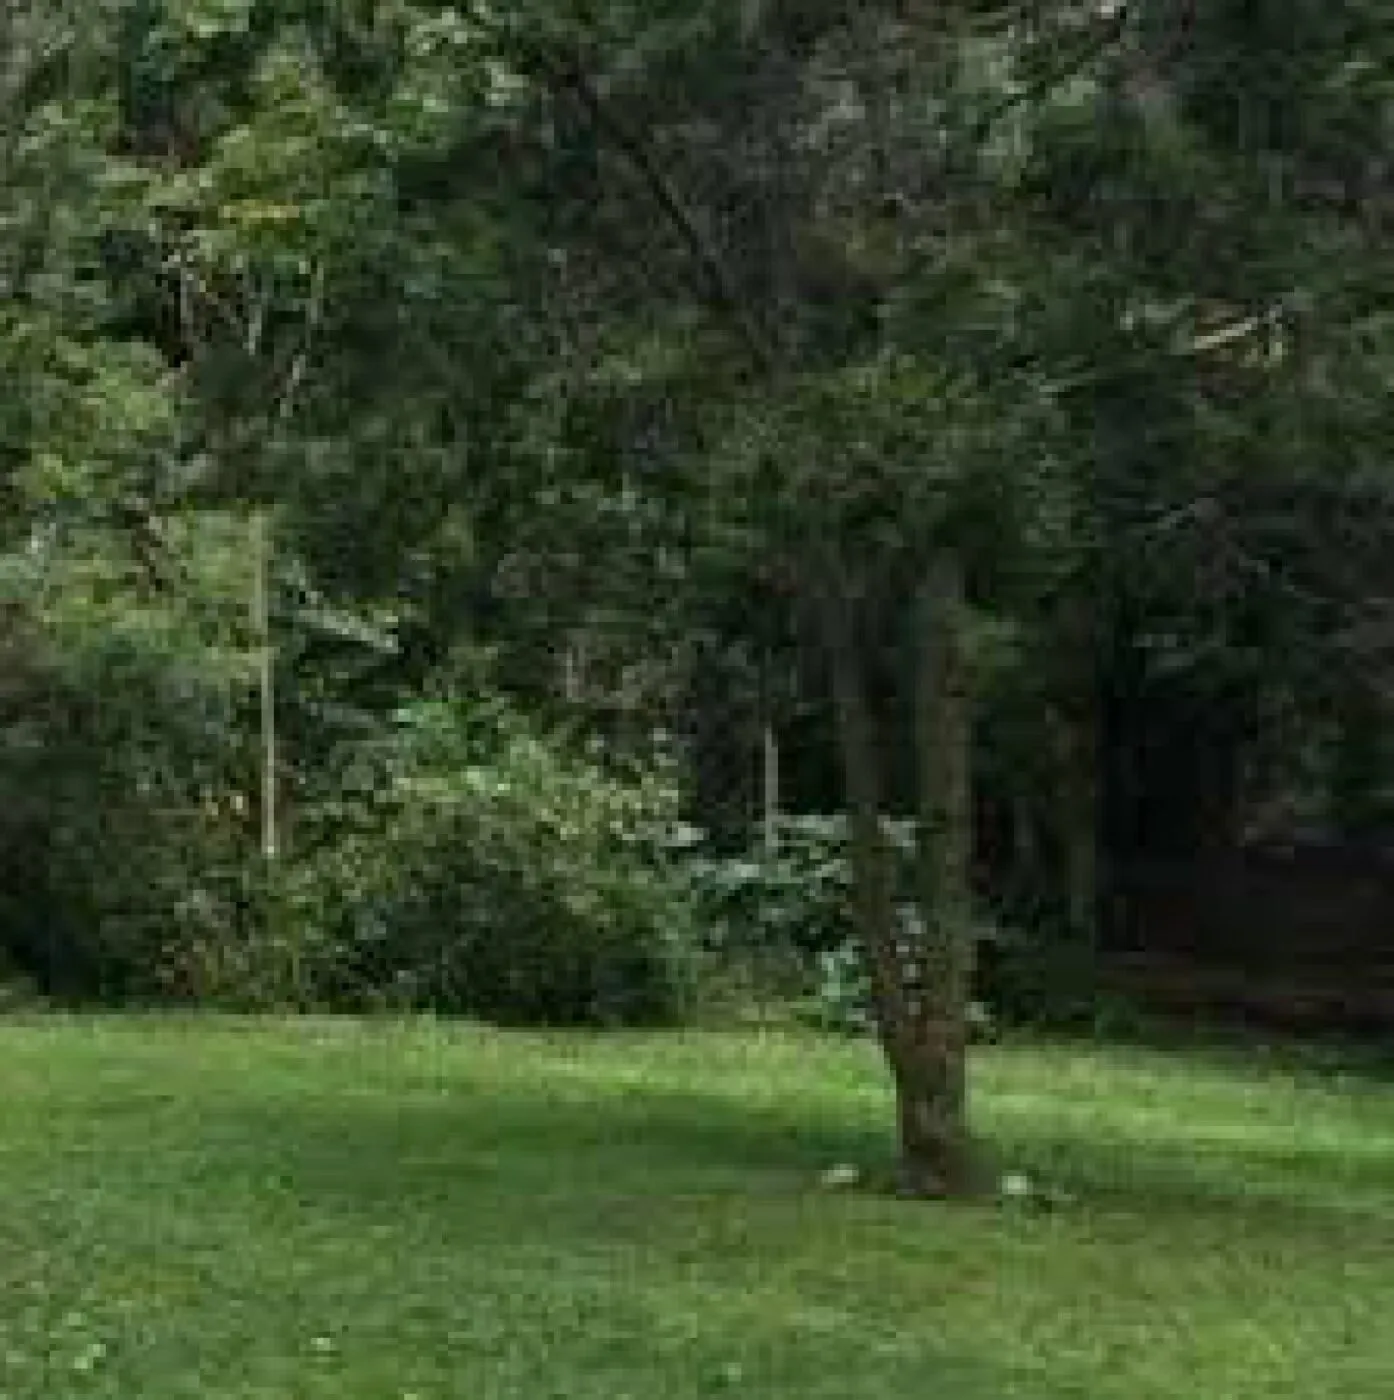 Land For Sale Real Estate-Land for sale in Karen Hardy 1/2 Acre @30M Ready Title Deed QUICK SALE Exclusive half acre 0.5🔥 4